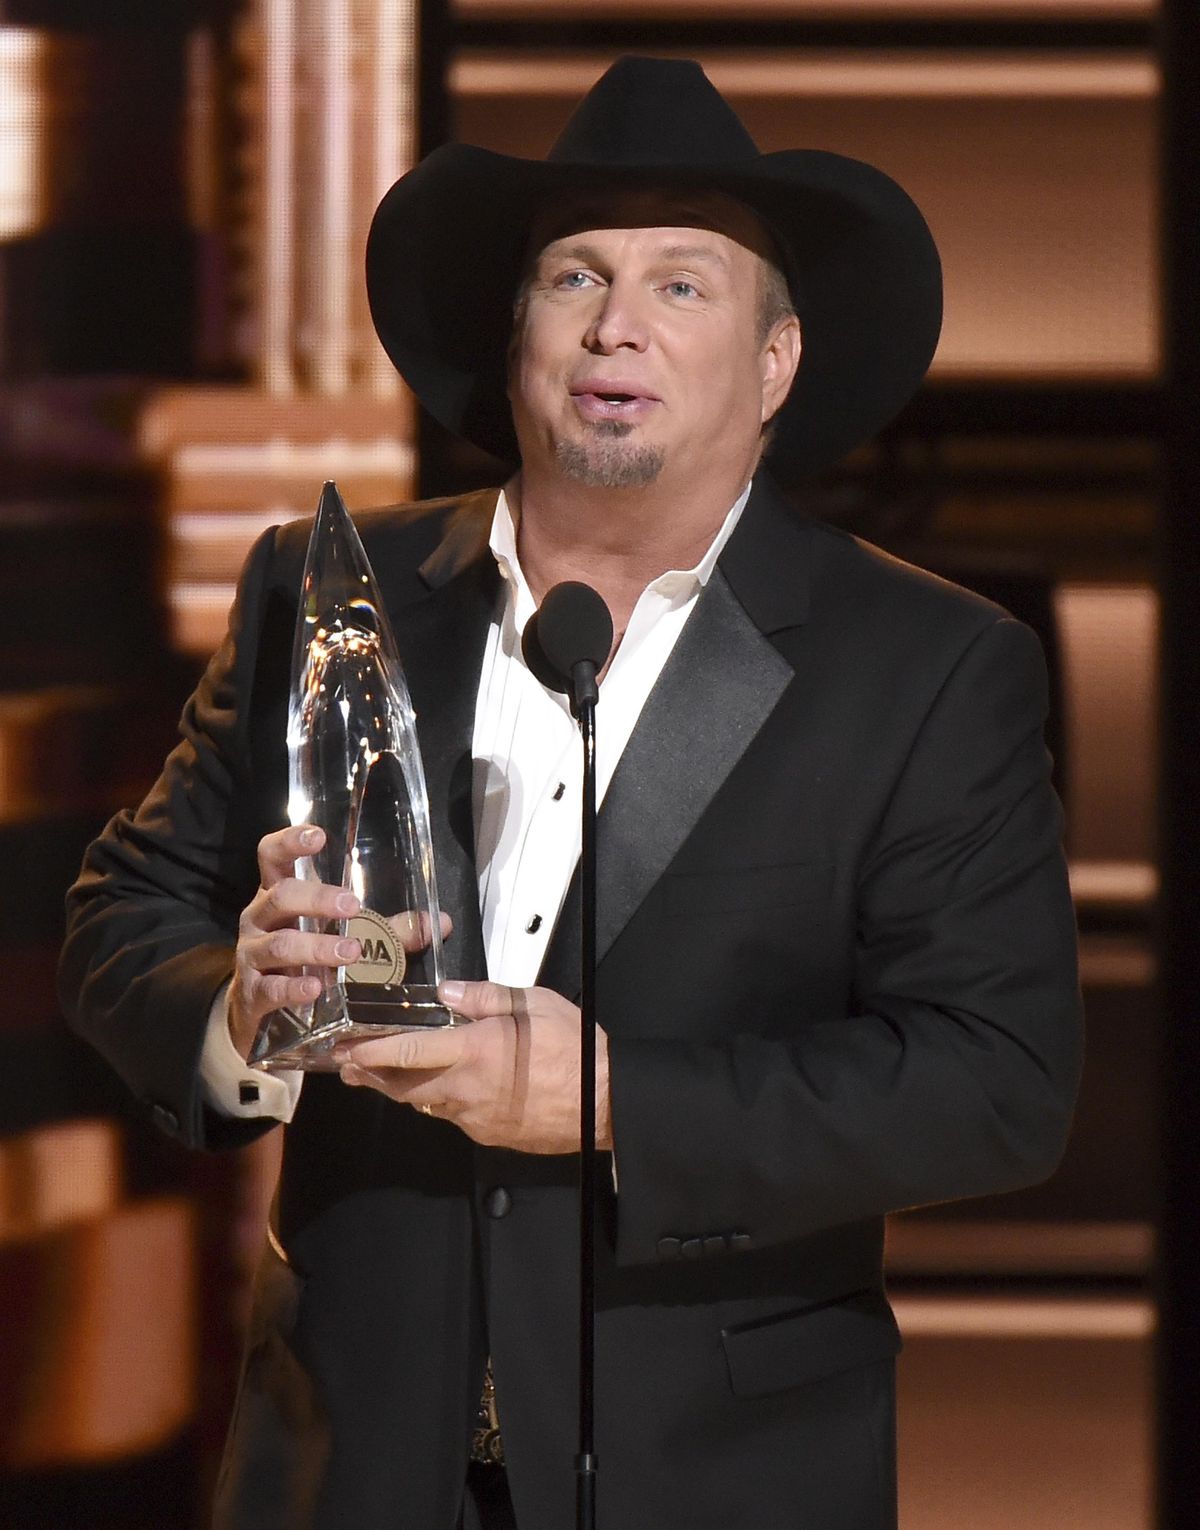 Garth Brooks accepts the award for entertainer of the year at the 50th annual CMA Awards at the Bridgestone Arena on Wednesday, Nov. 2, 2016, in Nashville, Tenn. (Charles Sykes / Associated Press)